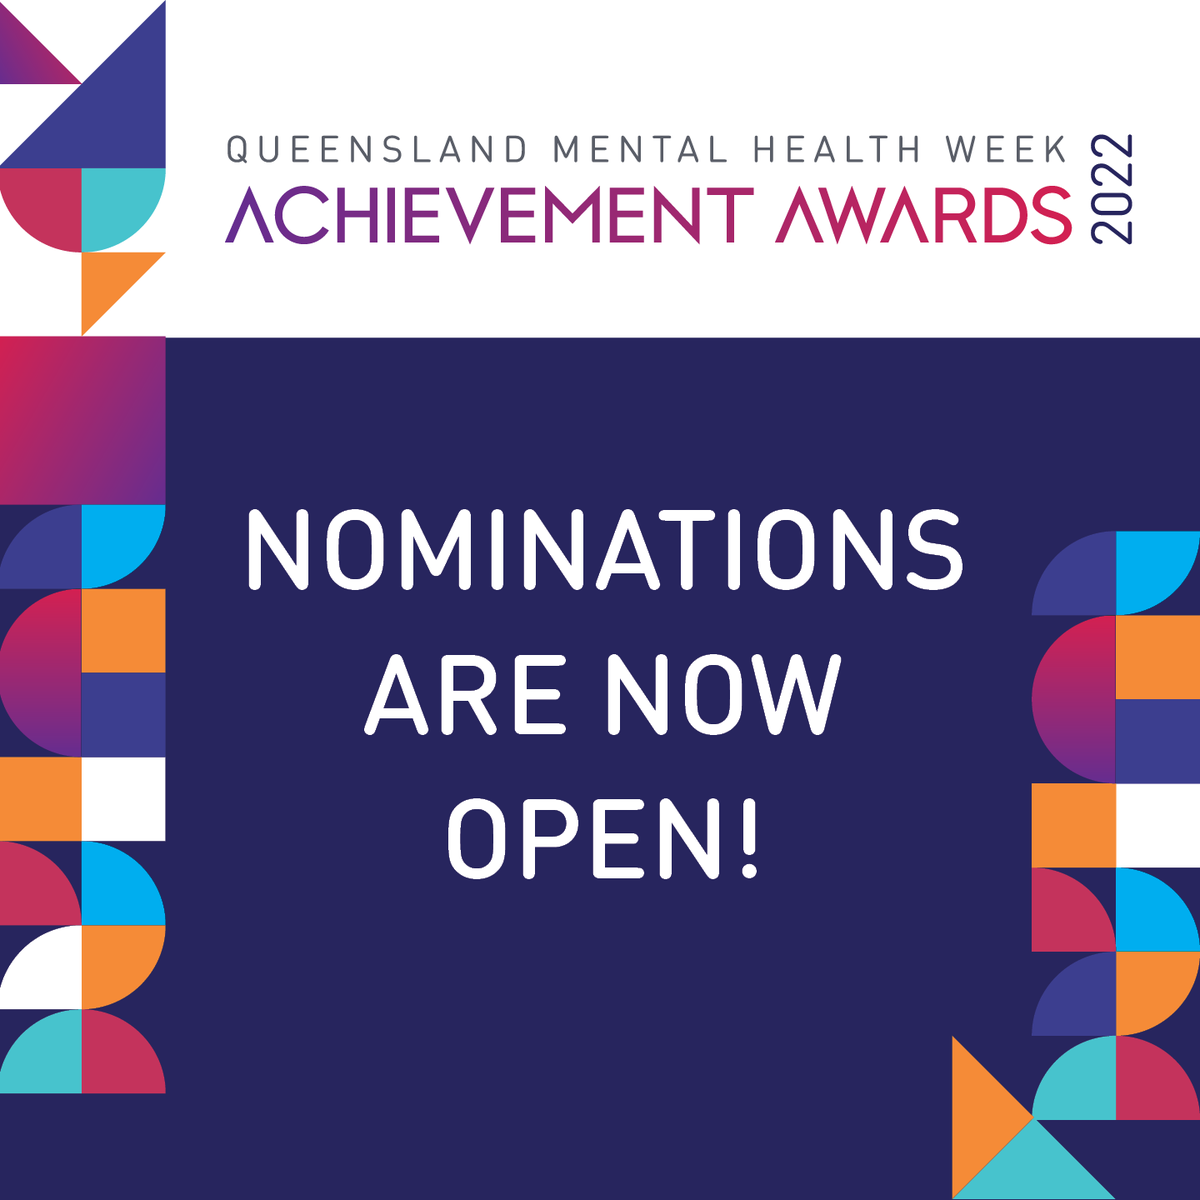 Nominations are now open for the Queensland Mental Health Week Achievement Awards, which recognise and celebrate the achievements of those working to reduce stigma & support and empower those living with mental illness across QLD. Find out more here > bit.ly/3nF8yNV